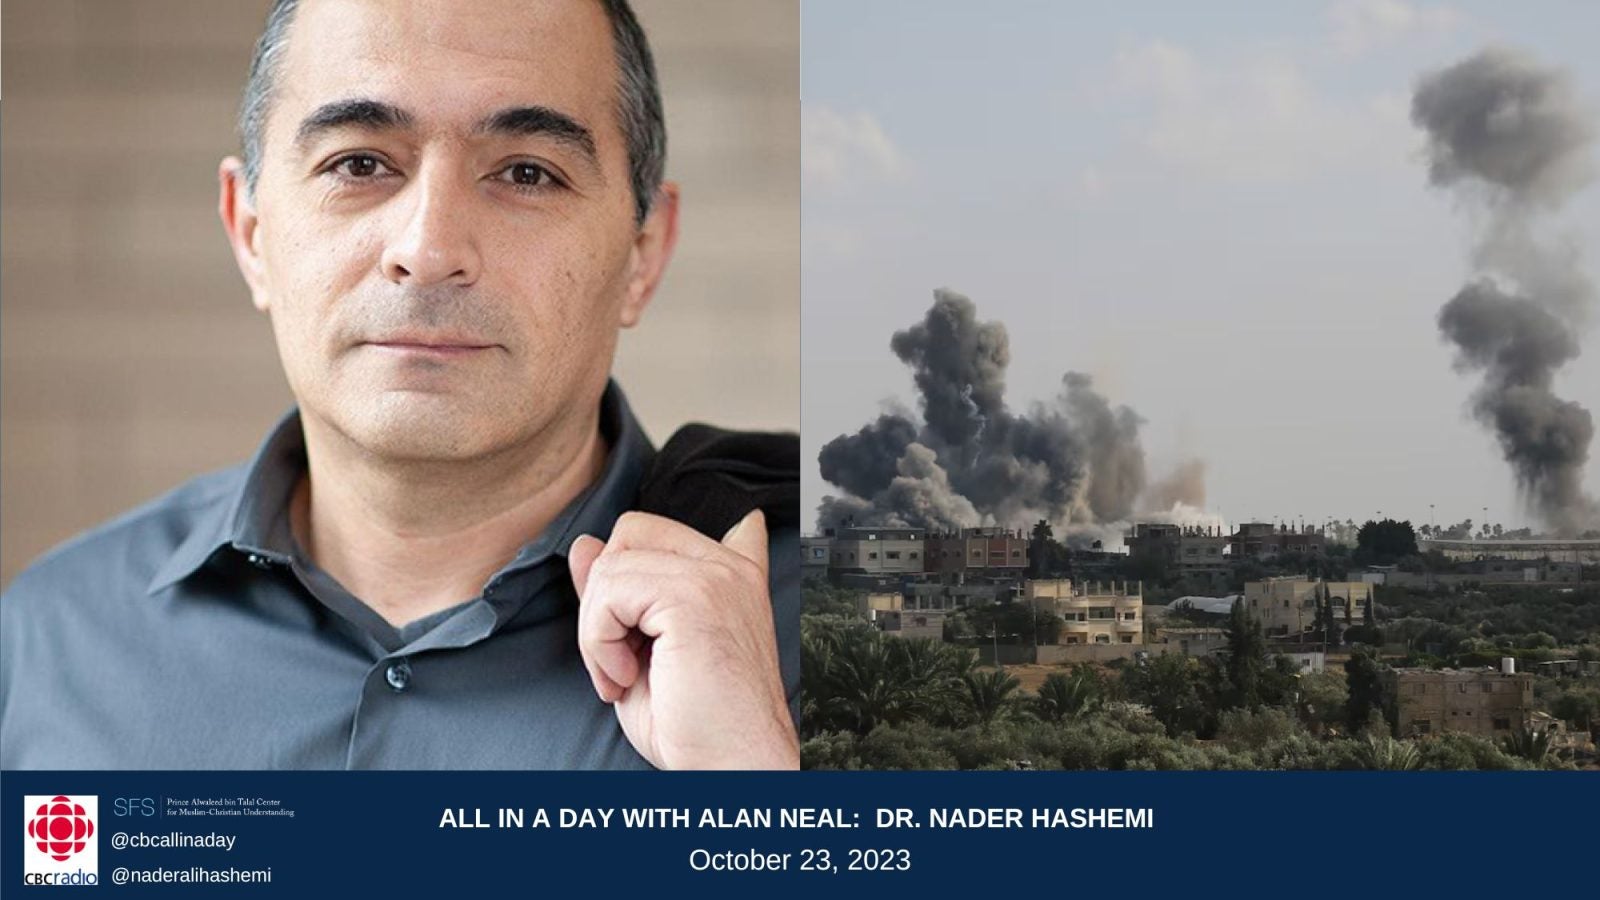 A photograph of Dr. Nader Hashemi alongside an image of a missile attack in Gaza